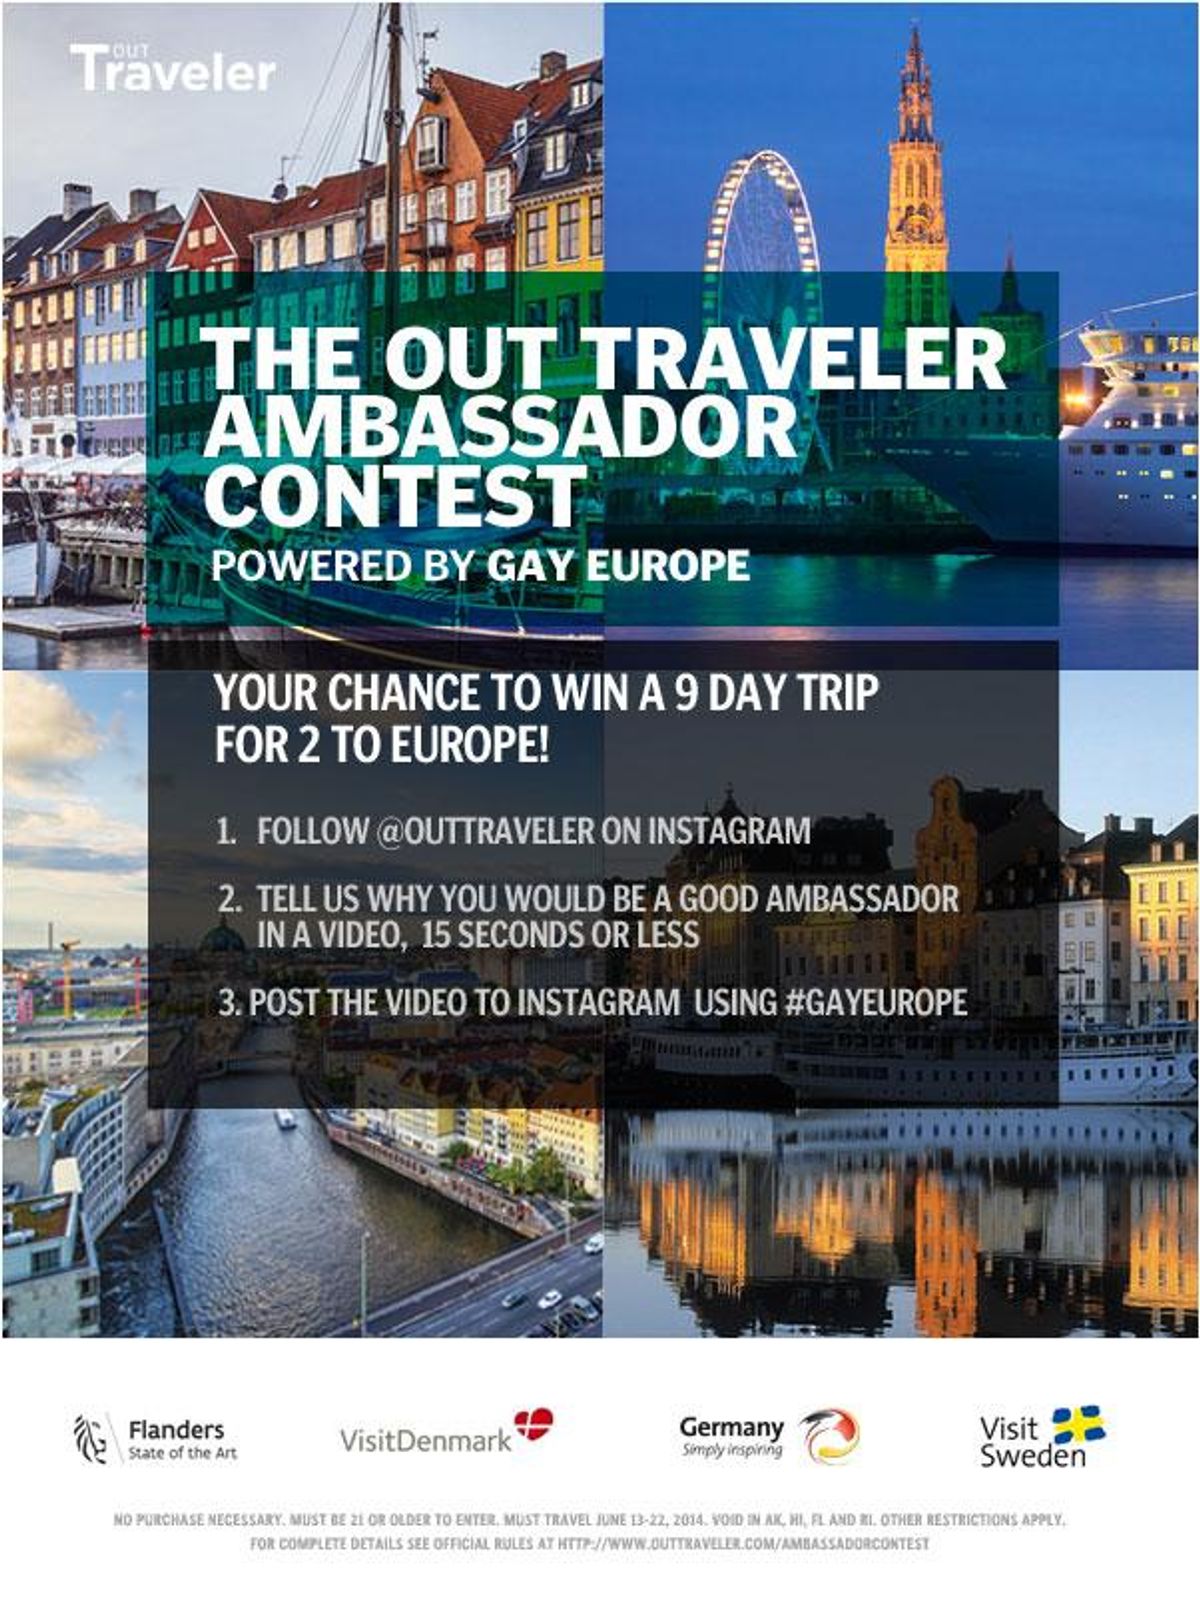 Out Traveler and Gay Europe, Inside & Out Offering Up Blockbuster Euro Contest